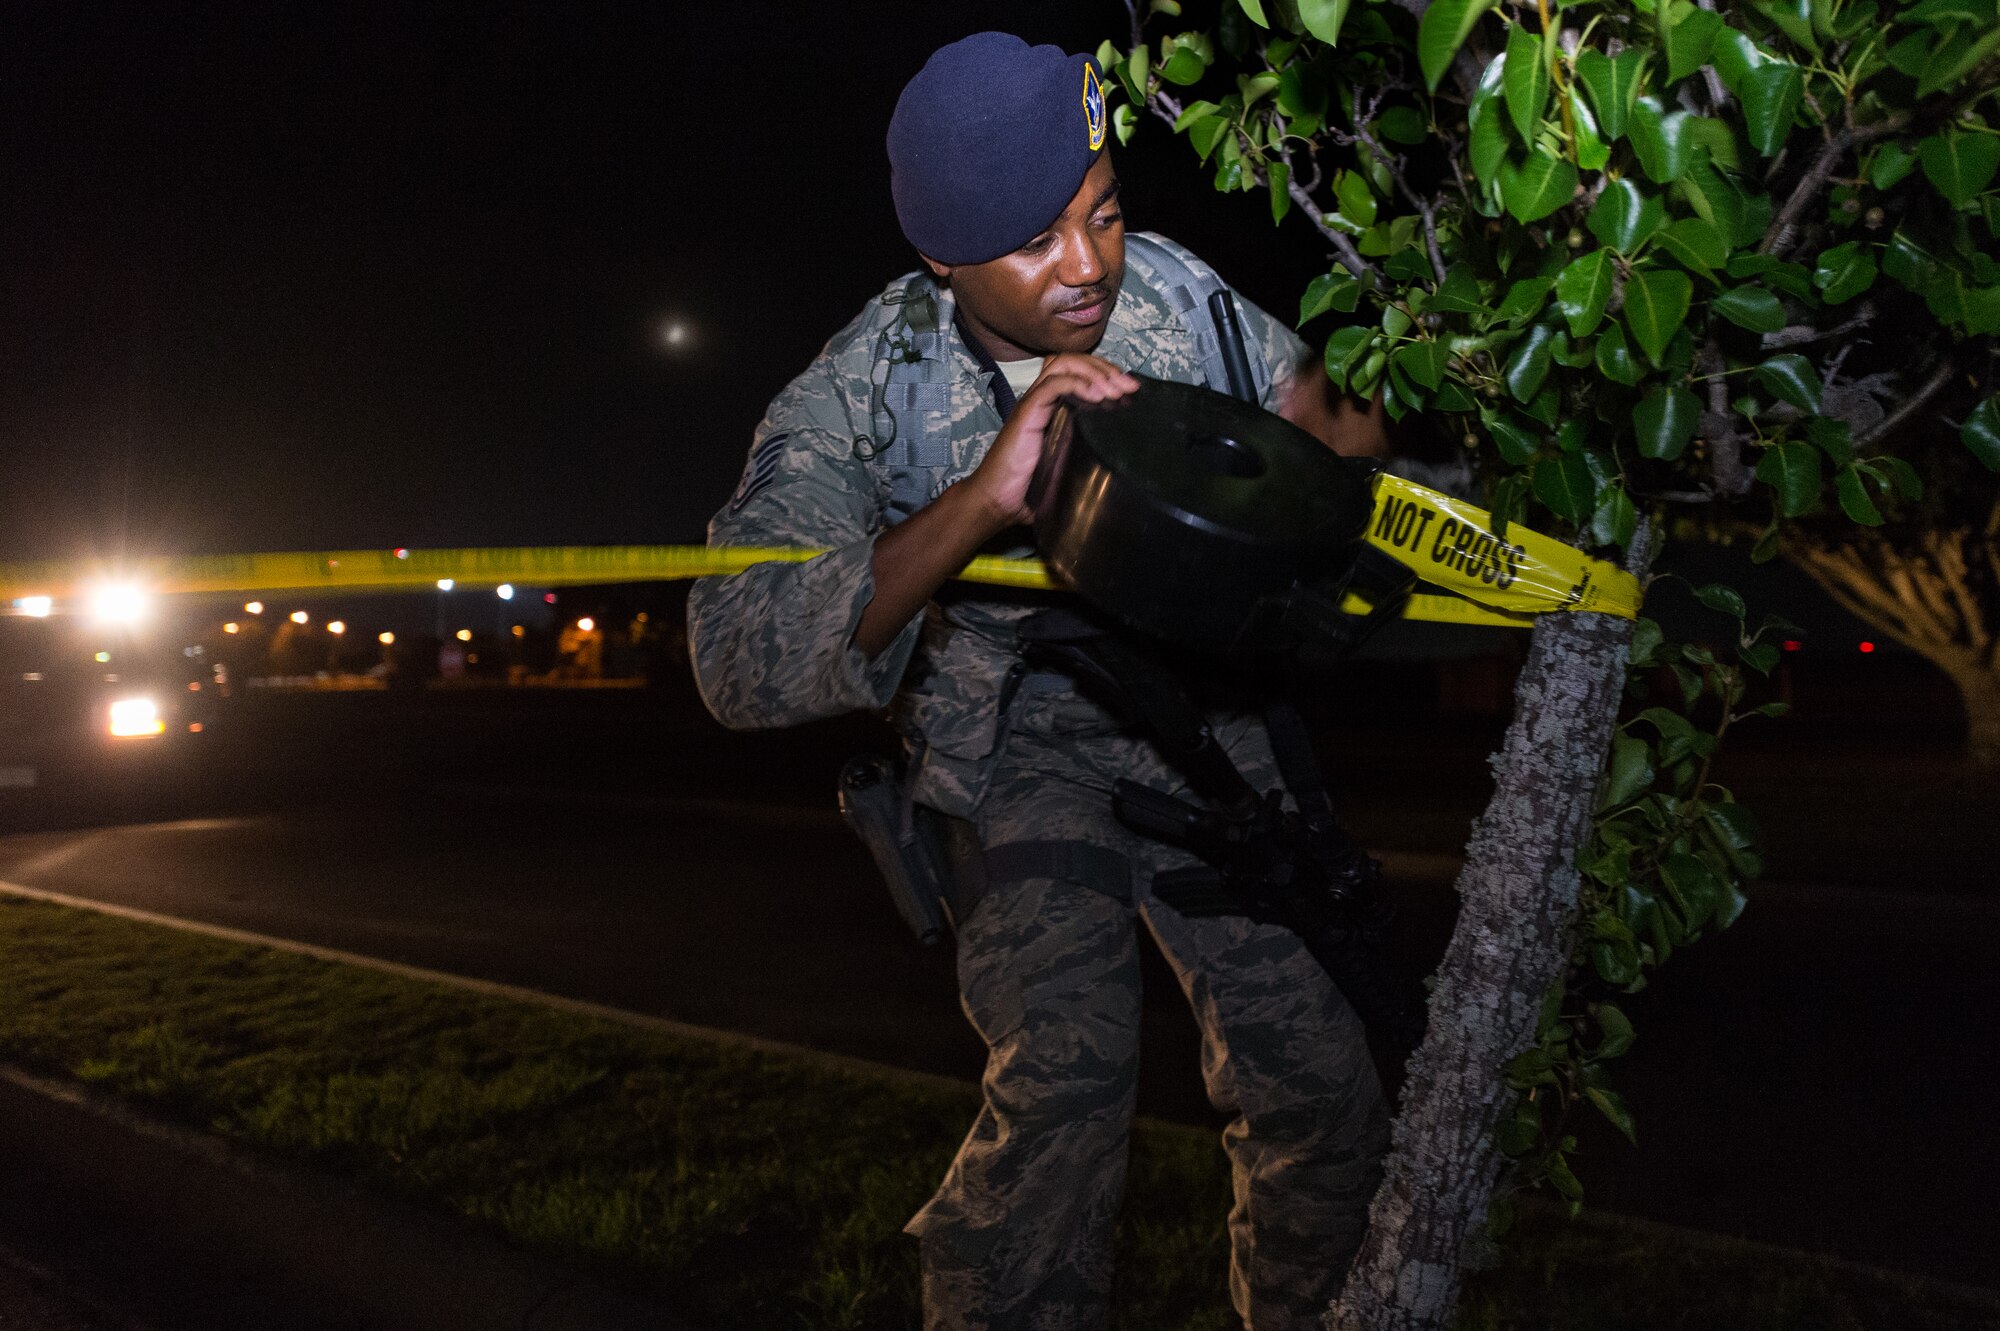 U.S. Air Force Tech. Sgt. Jason Williams, 116th Security Forces Squadron, Georgia Air National Guard, installs crime scene barrier tape around a simulated crime scene during a training exercise at Joint Base Savannah, Ga., June 24, 2015. The JSTARS cops from the Georgia Air National Guard’s 116th Air Control Wing completed 15 days of law enforcement and flightline security training during their annual tour at Joint Base Savannah. During the training, the security forces Airmen responded to multiple simulated security threats each day and played the role of both cops and aggressors under the watchful eye of evaluators from the unit. (U.S. Air National Guard photo by Senior Master Sgt. Roger Parsons/Released)

